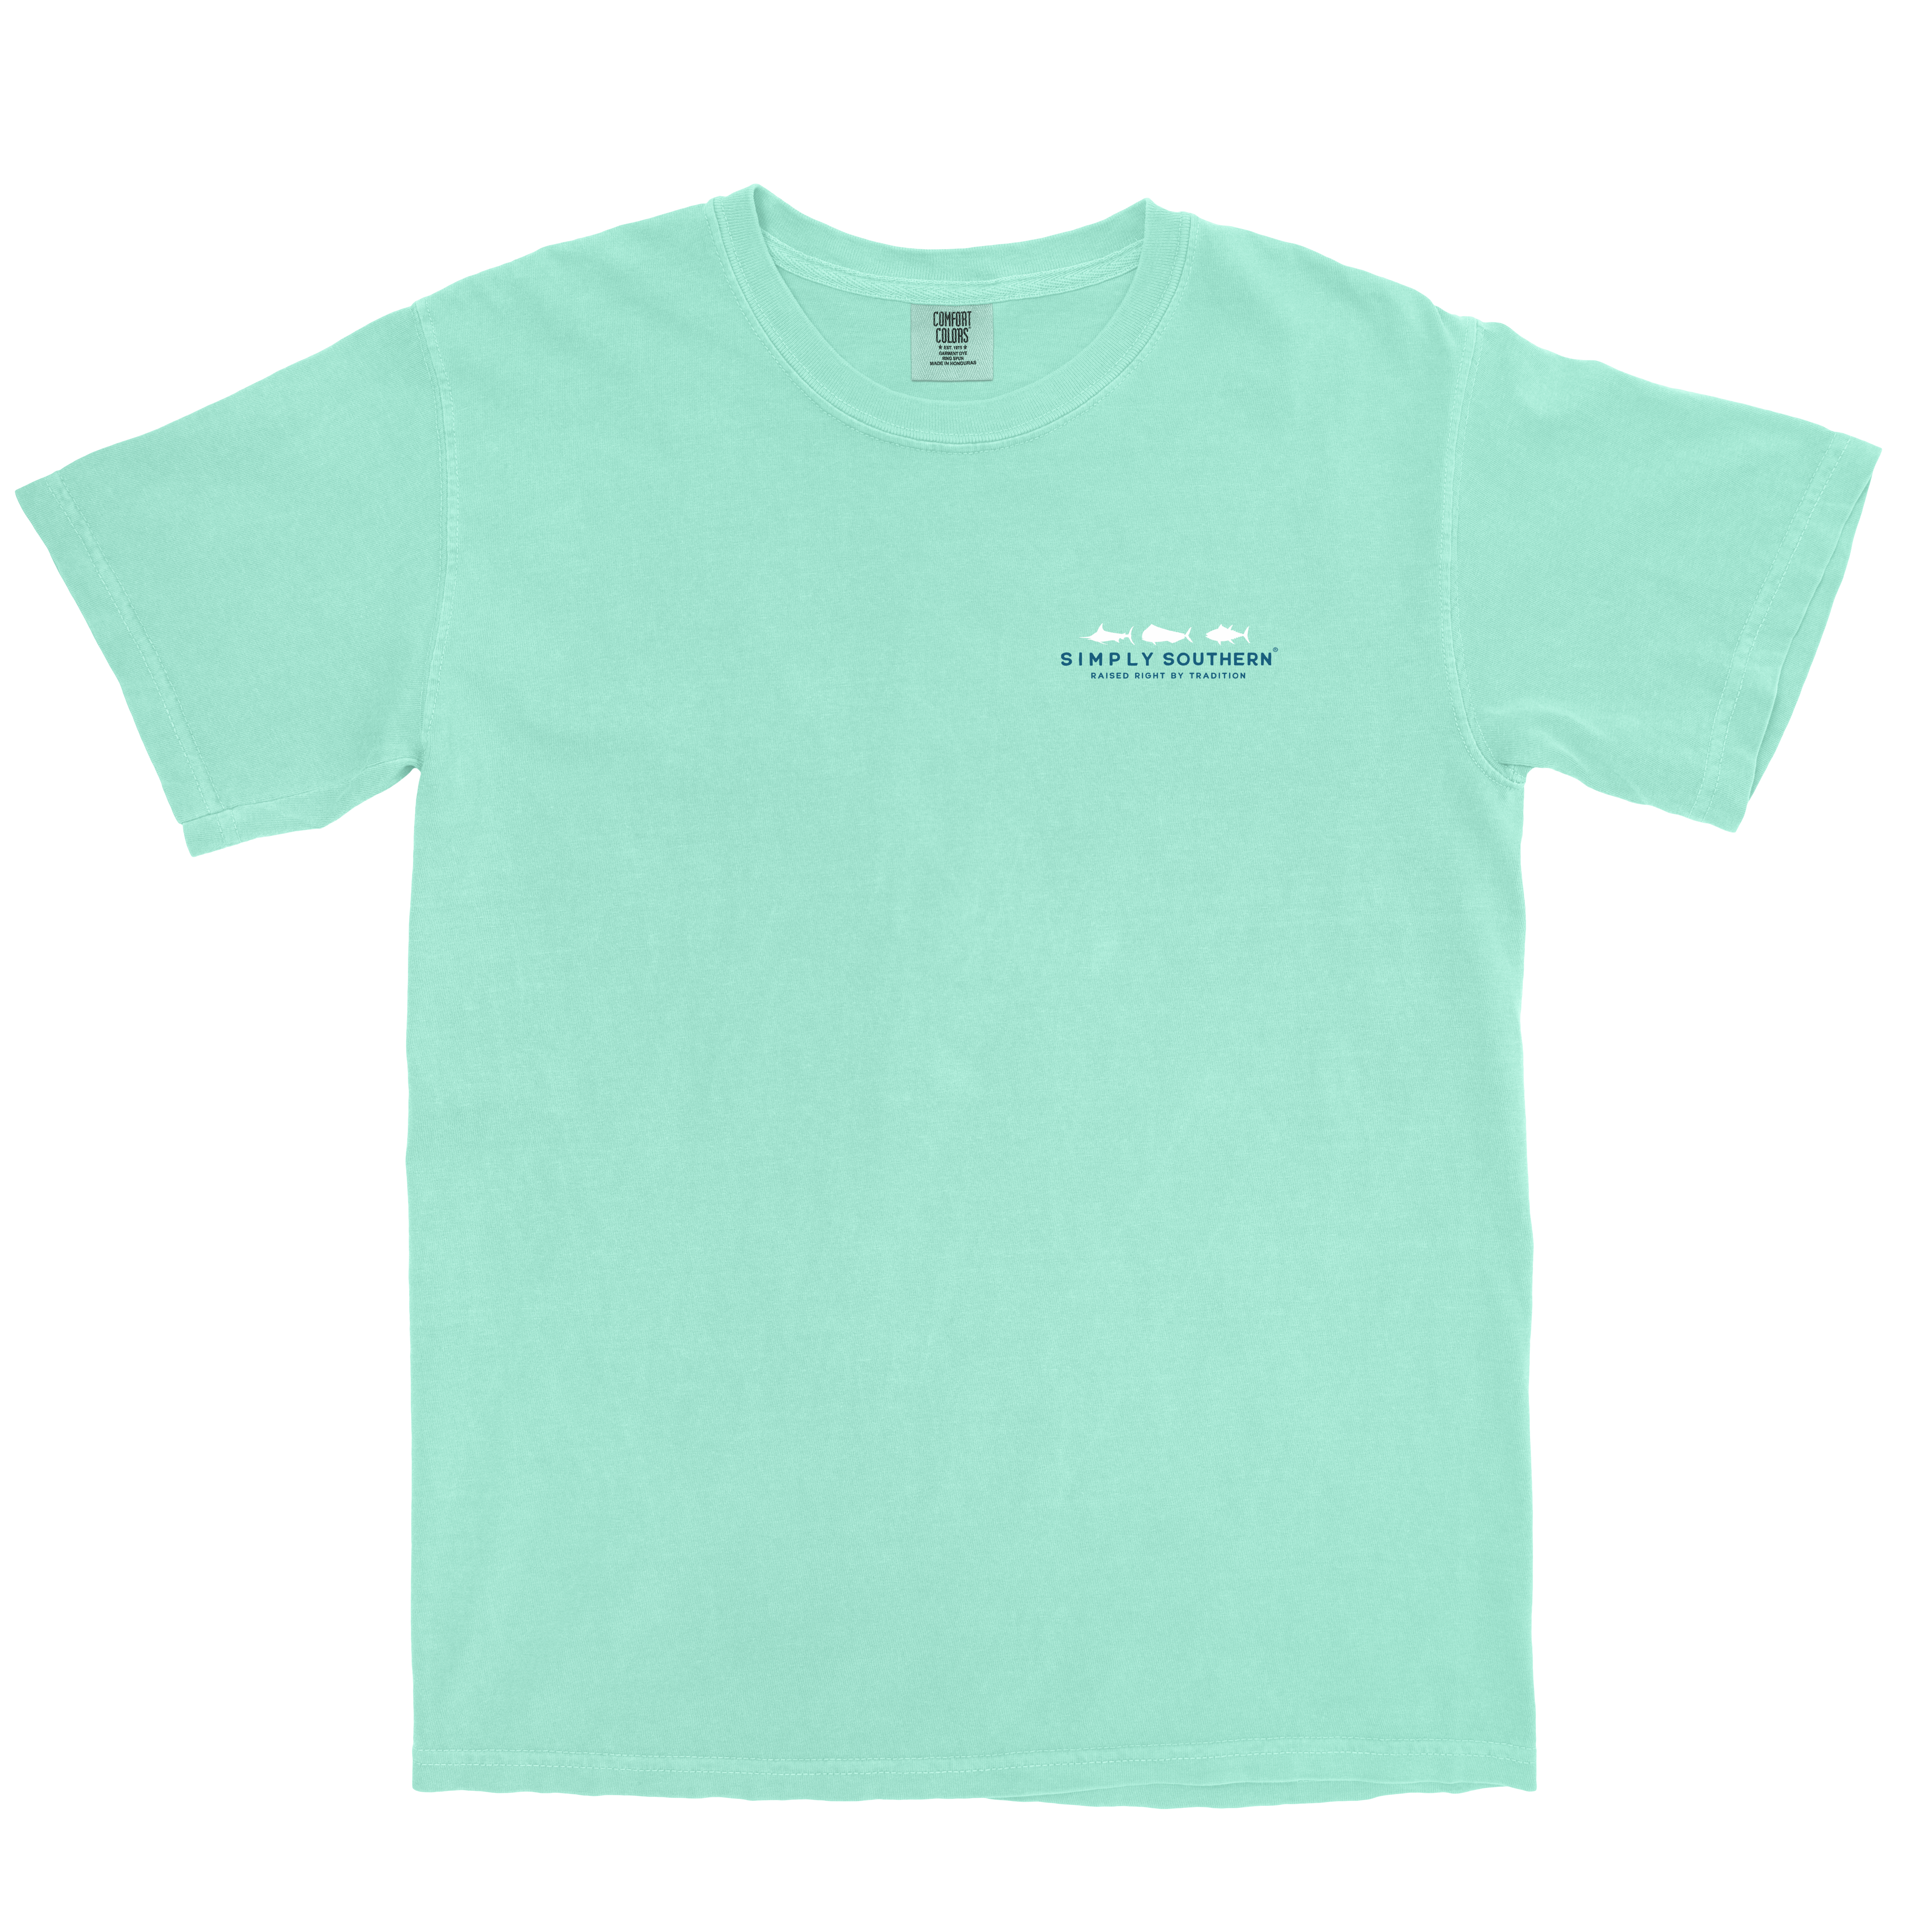 Happy Days Tee Blue Spruce Comfort Colors Aesthetic T-shirt 